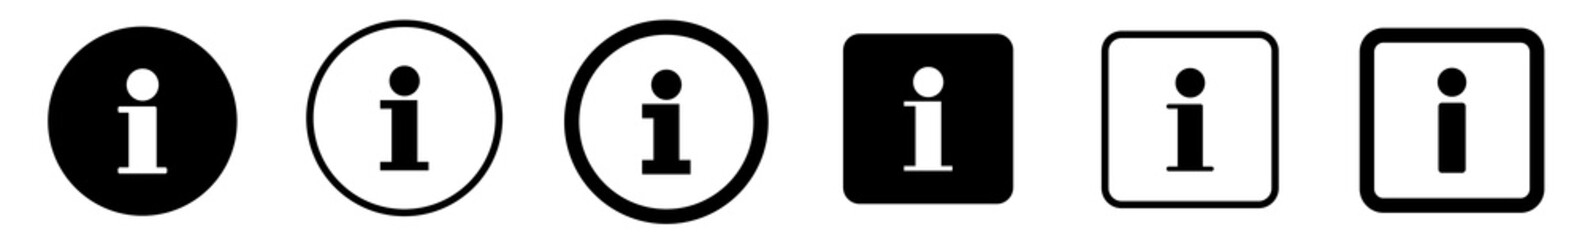 info point icon black | information illustration | i point symbol | help logo | hint sign | isolated